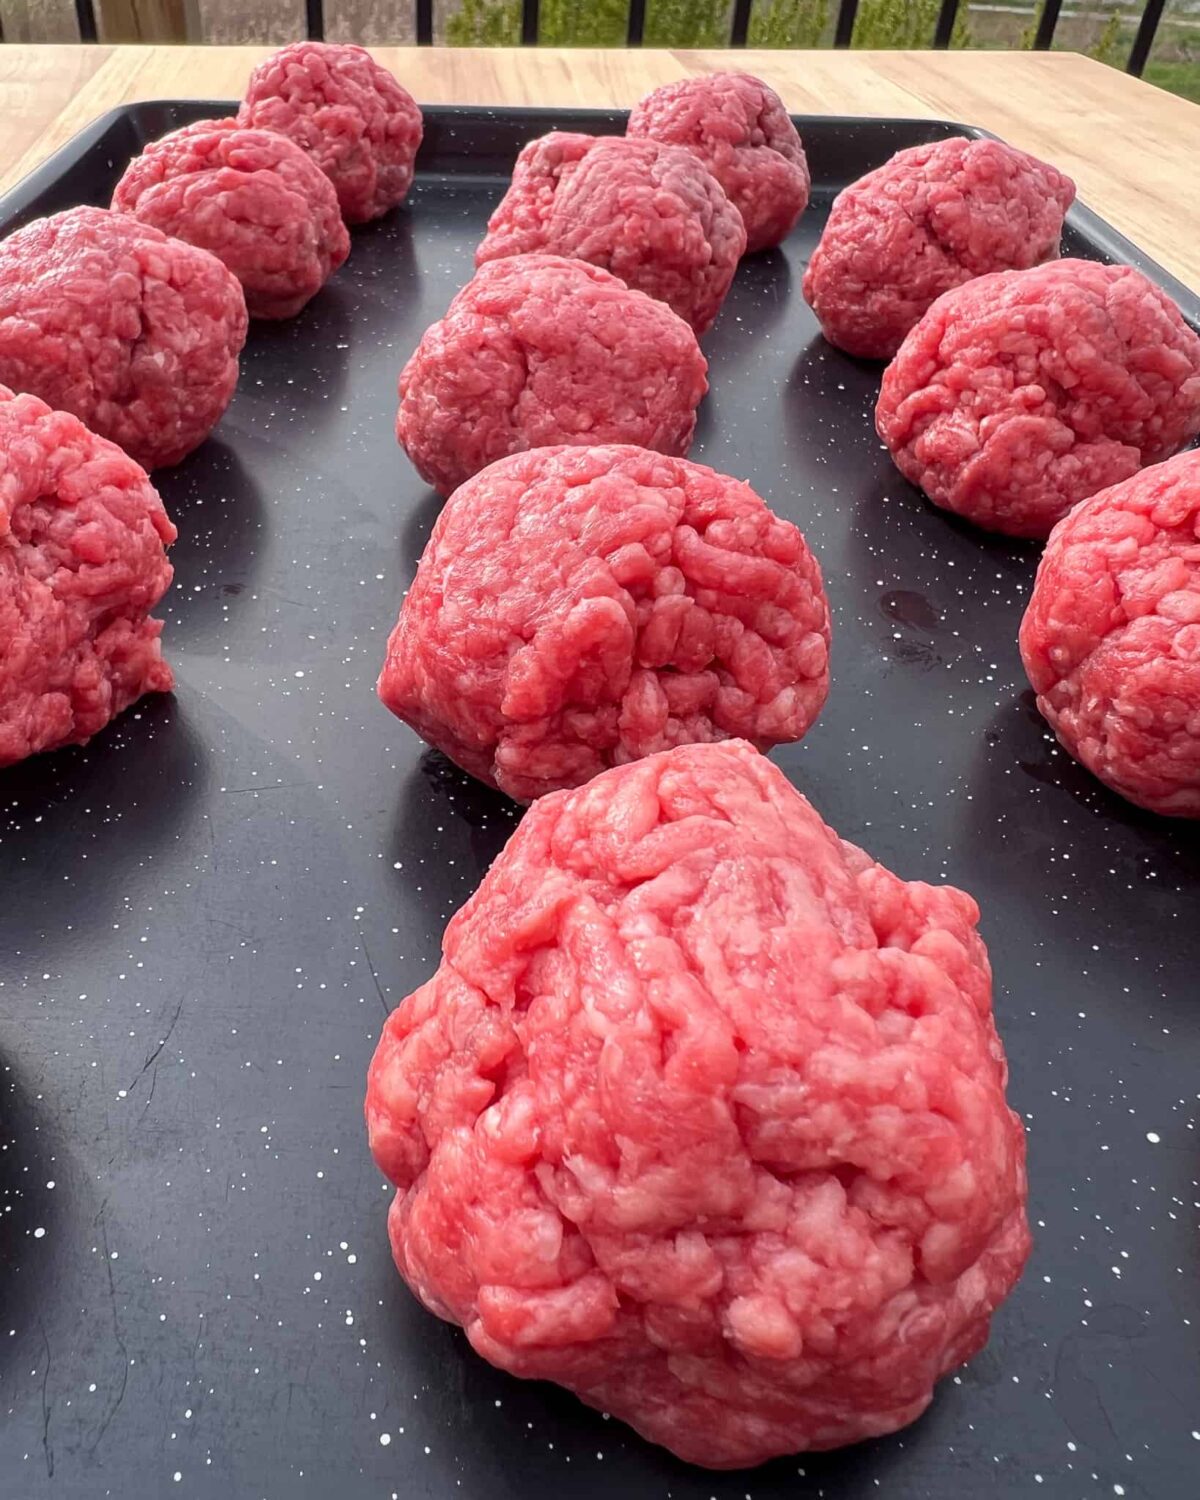 Roll the ground beef into 3 ounce balls and place on a sheet pan.